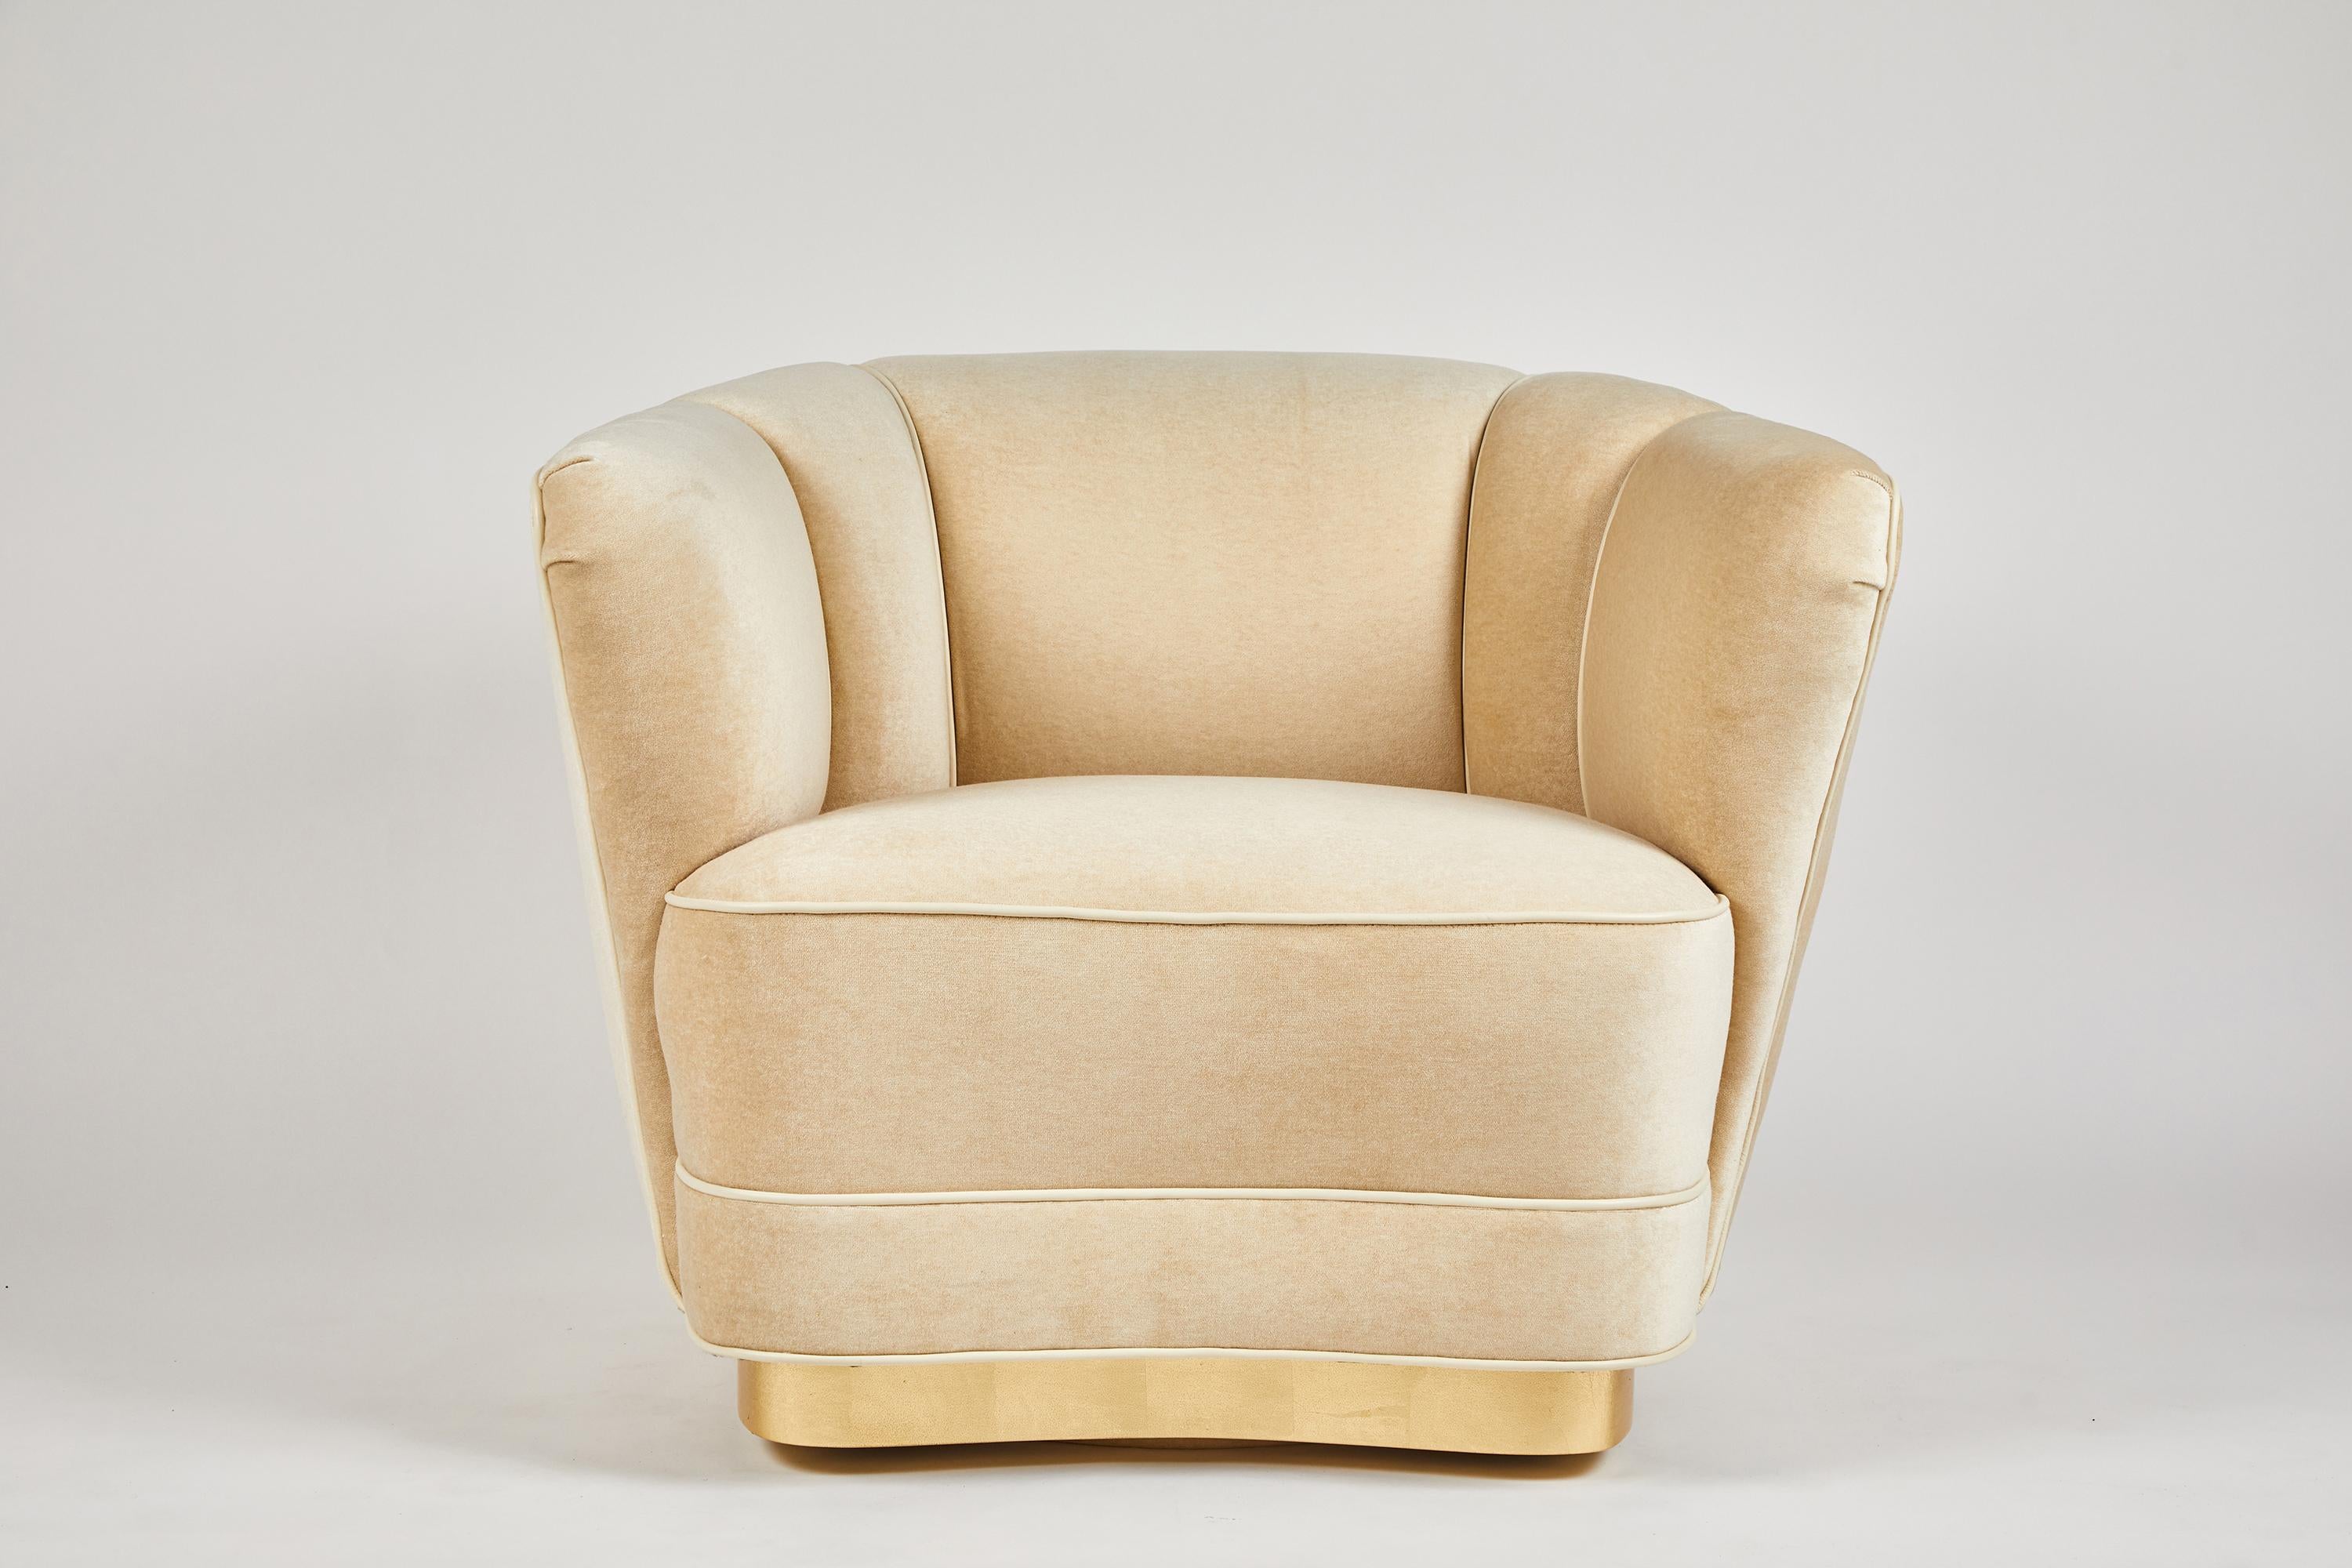 Dragonette limited introduces the Sutton place club chair. A beautiful and elegant design, as shown the swiveling version on a gold-leafed base. Fully customizable, including a footed version. Price is COM.